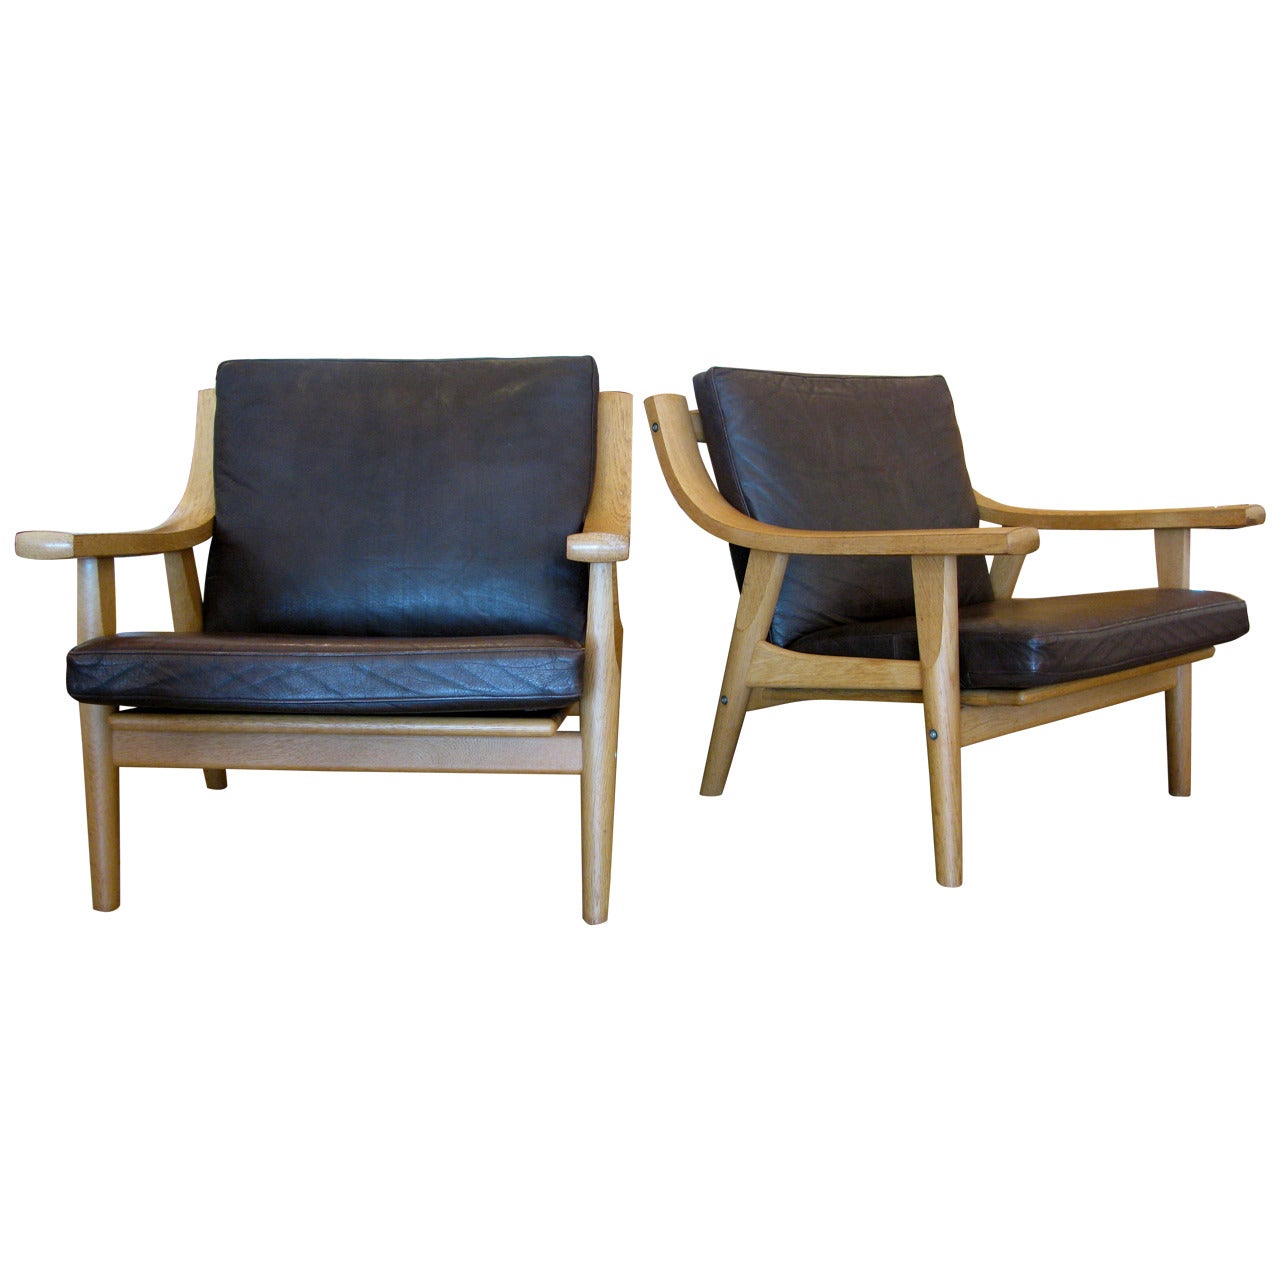 Pair of Hans Wegner Oak and Leather Chairs